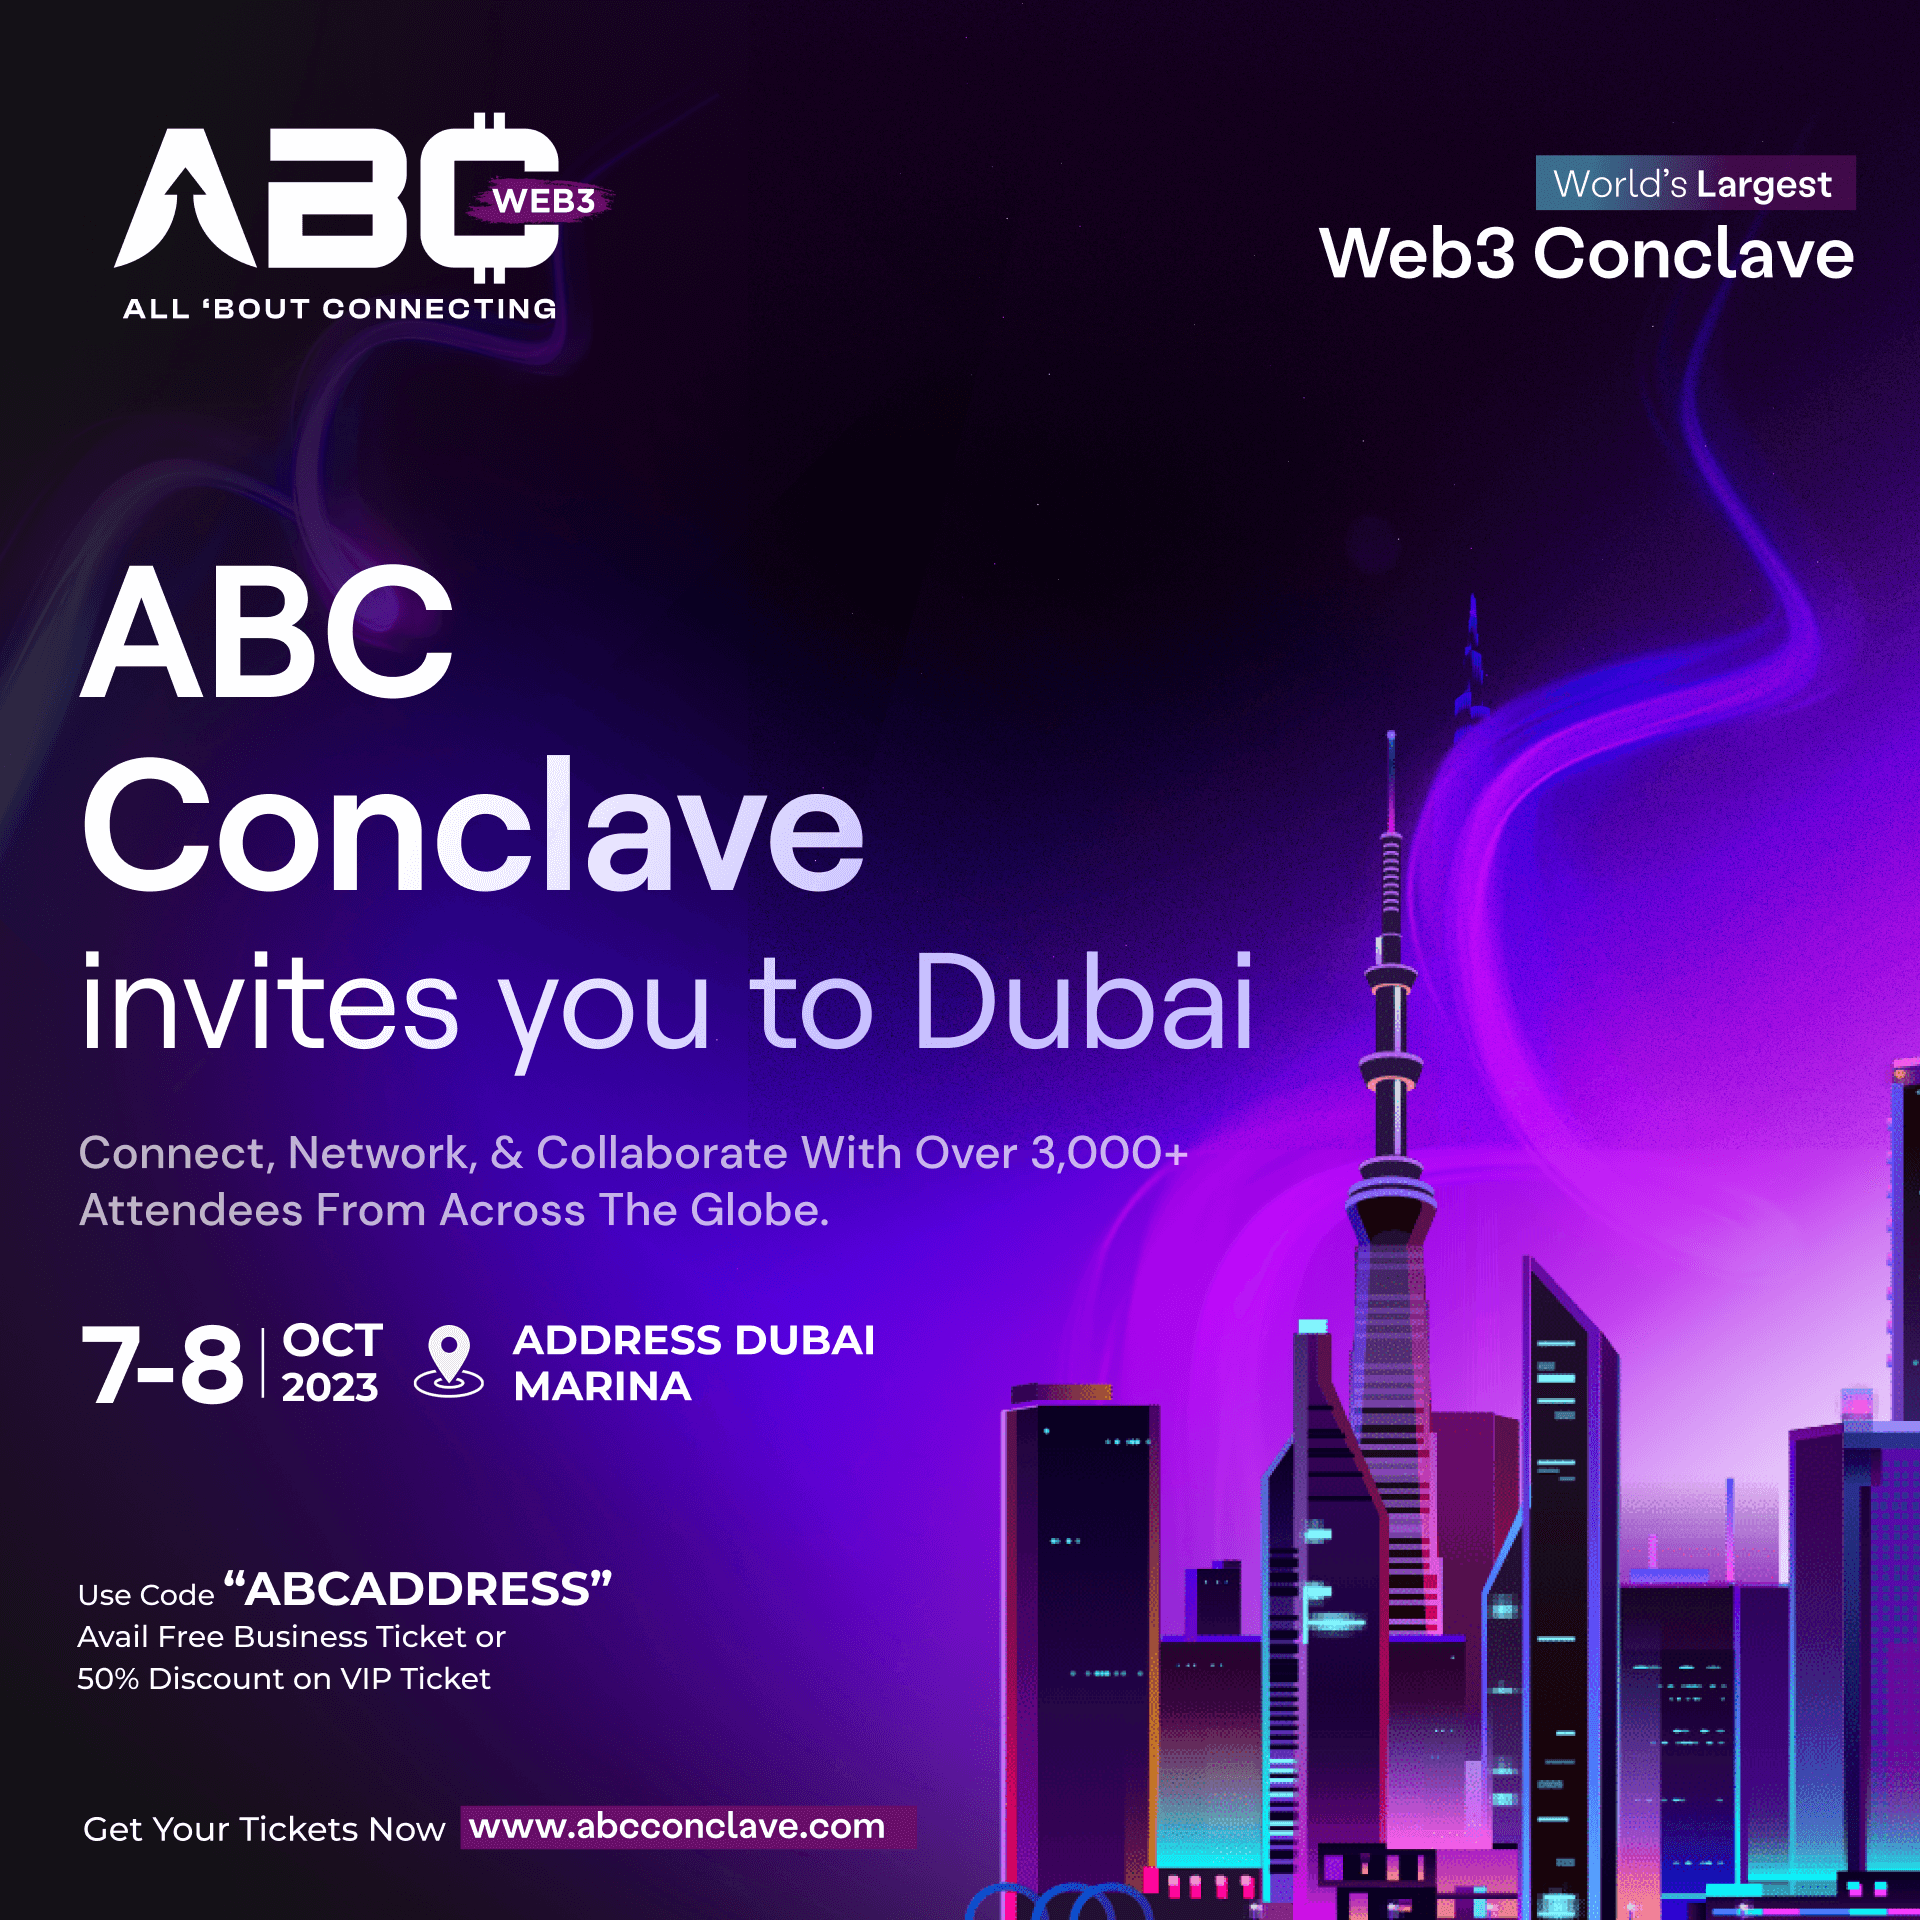 Grab complimentary Business ticket using code “ABCADDRESS” & Exclusive 50% discount on VIP tickets using same code.